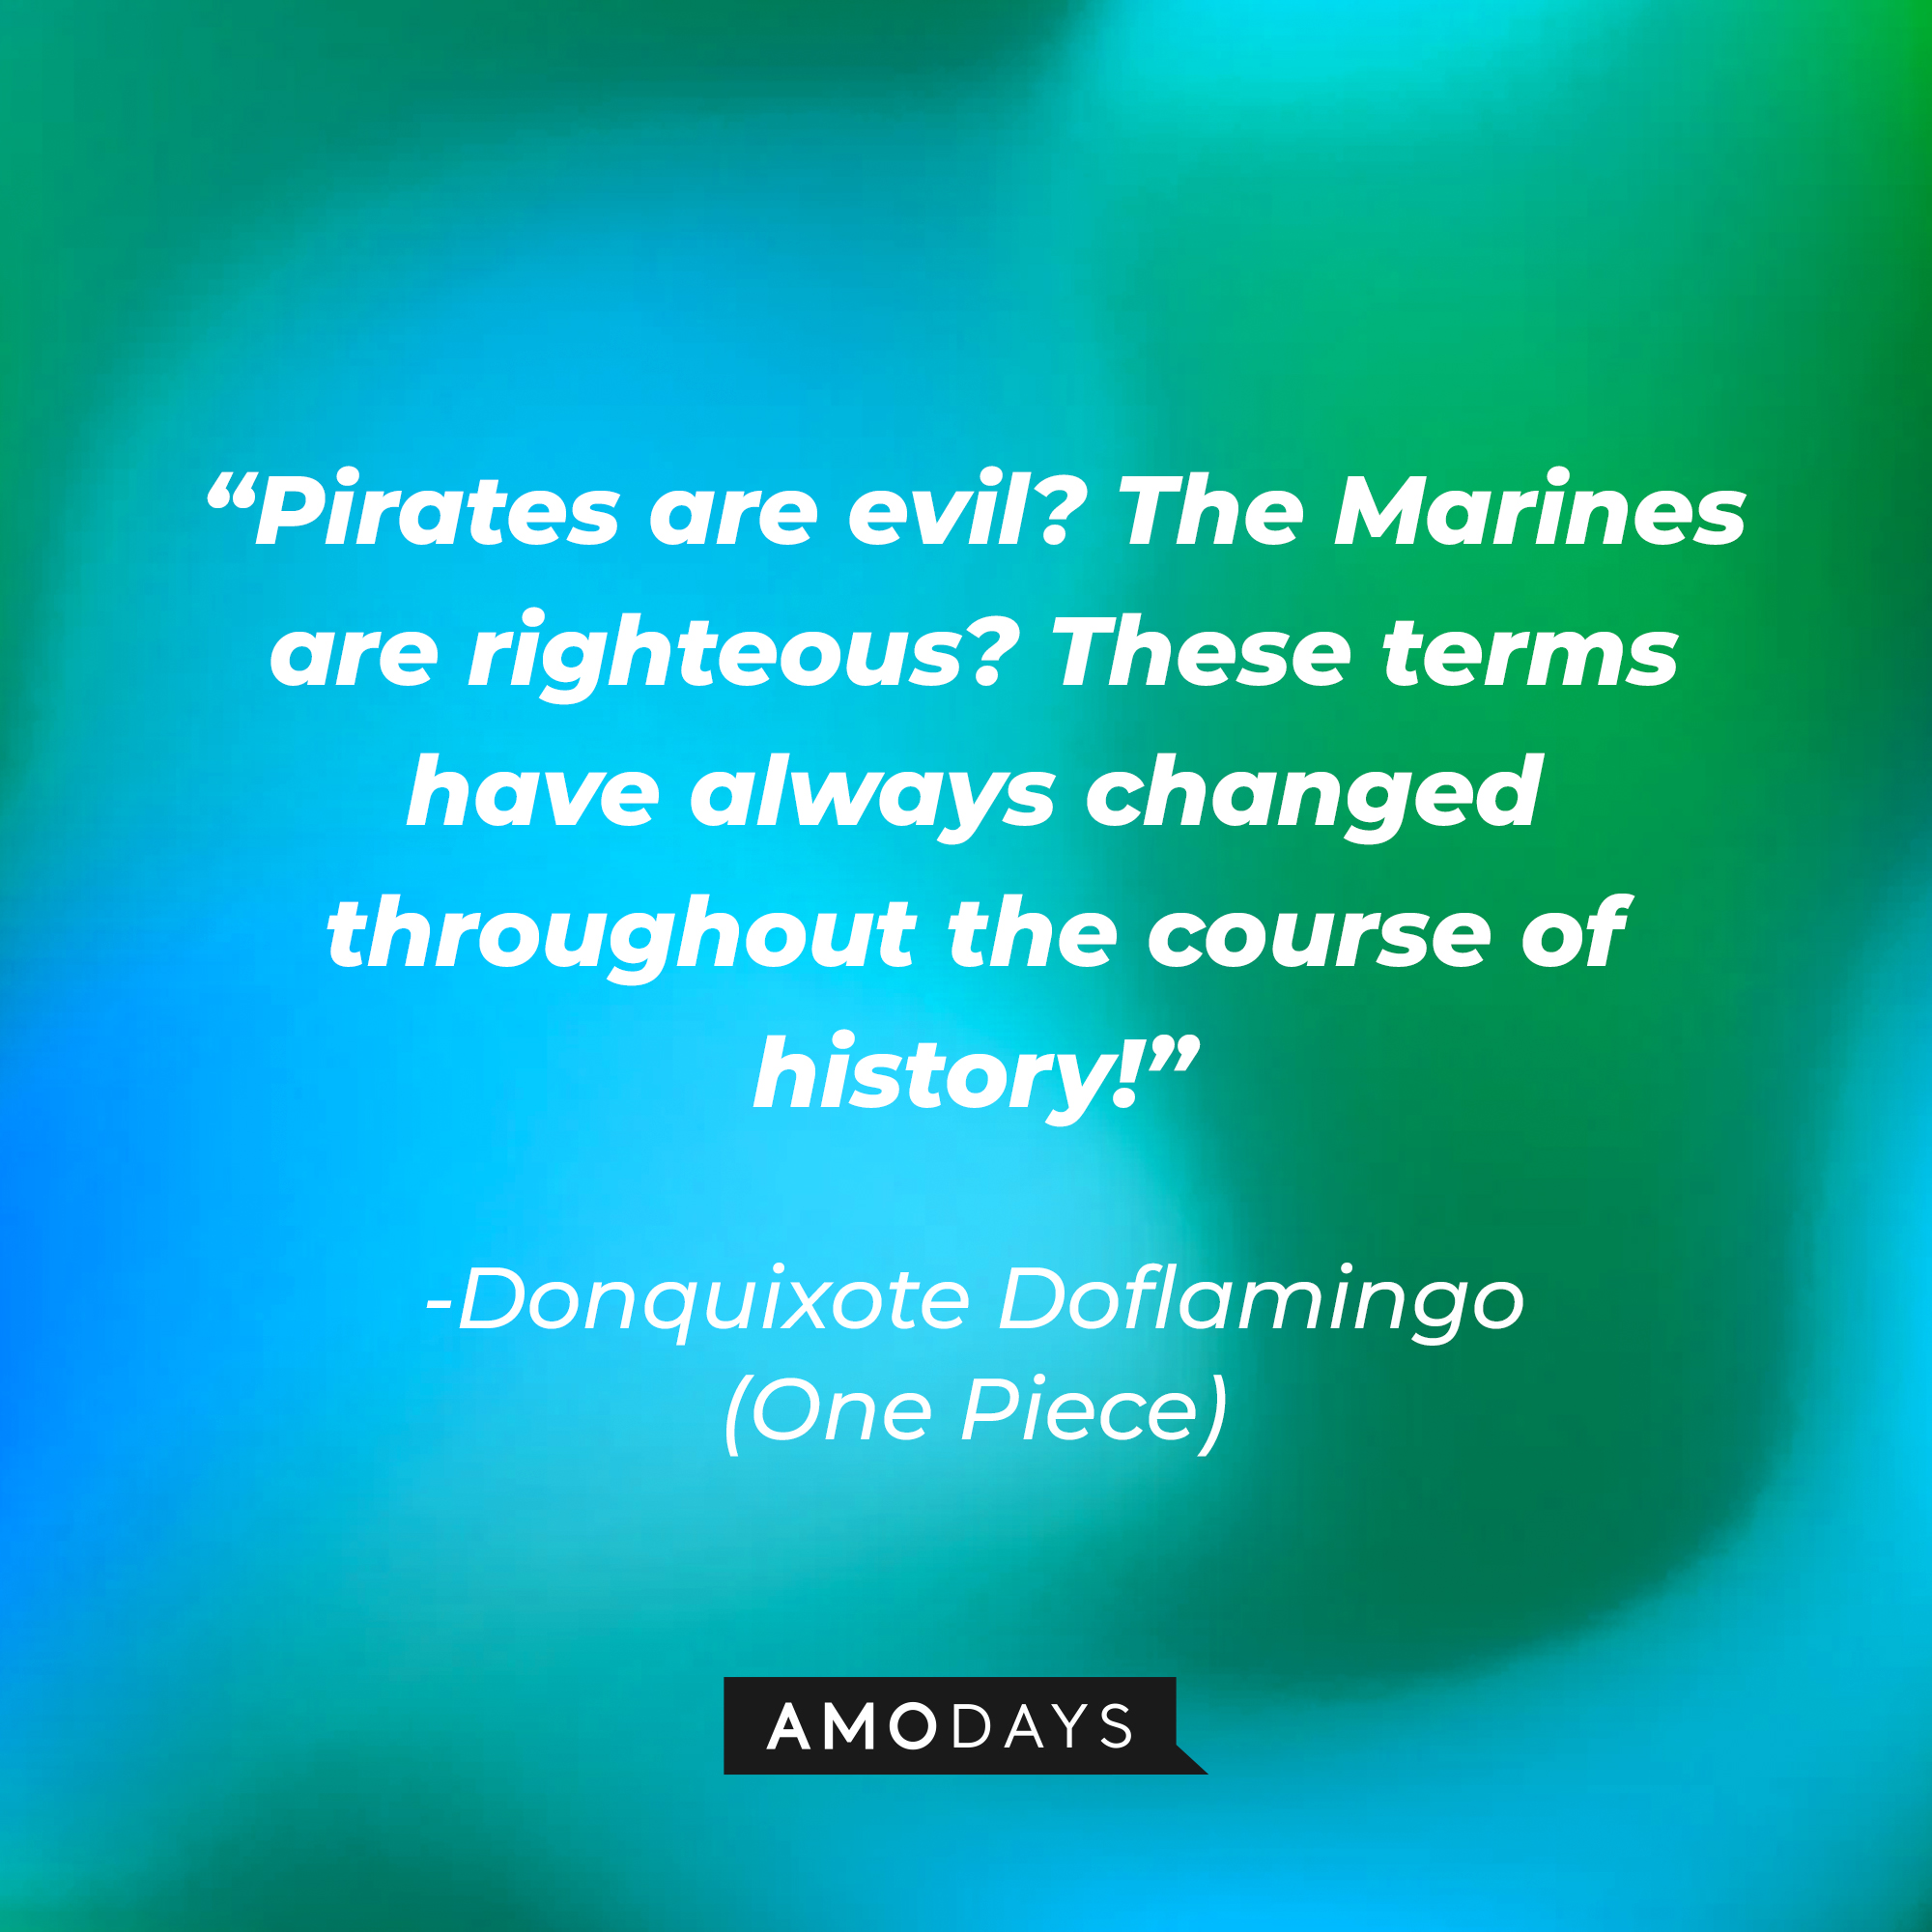 Donquixote Doflamingo's quote: "Pirates are evil? The Marines are righteous? These terms have always changed throughout the course of history!” | Source: Amodays